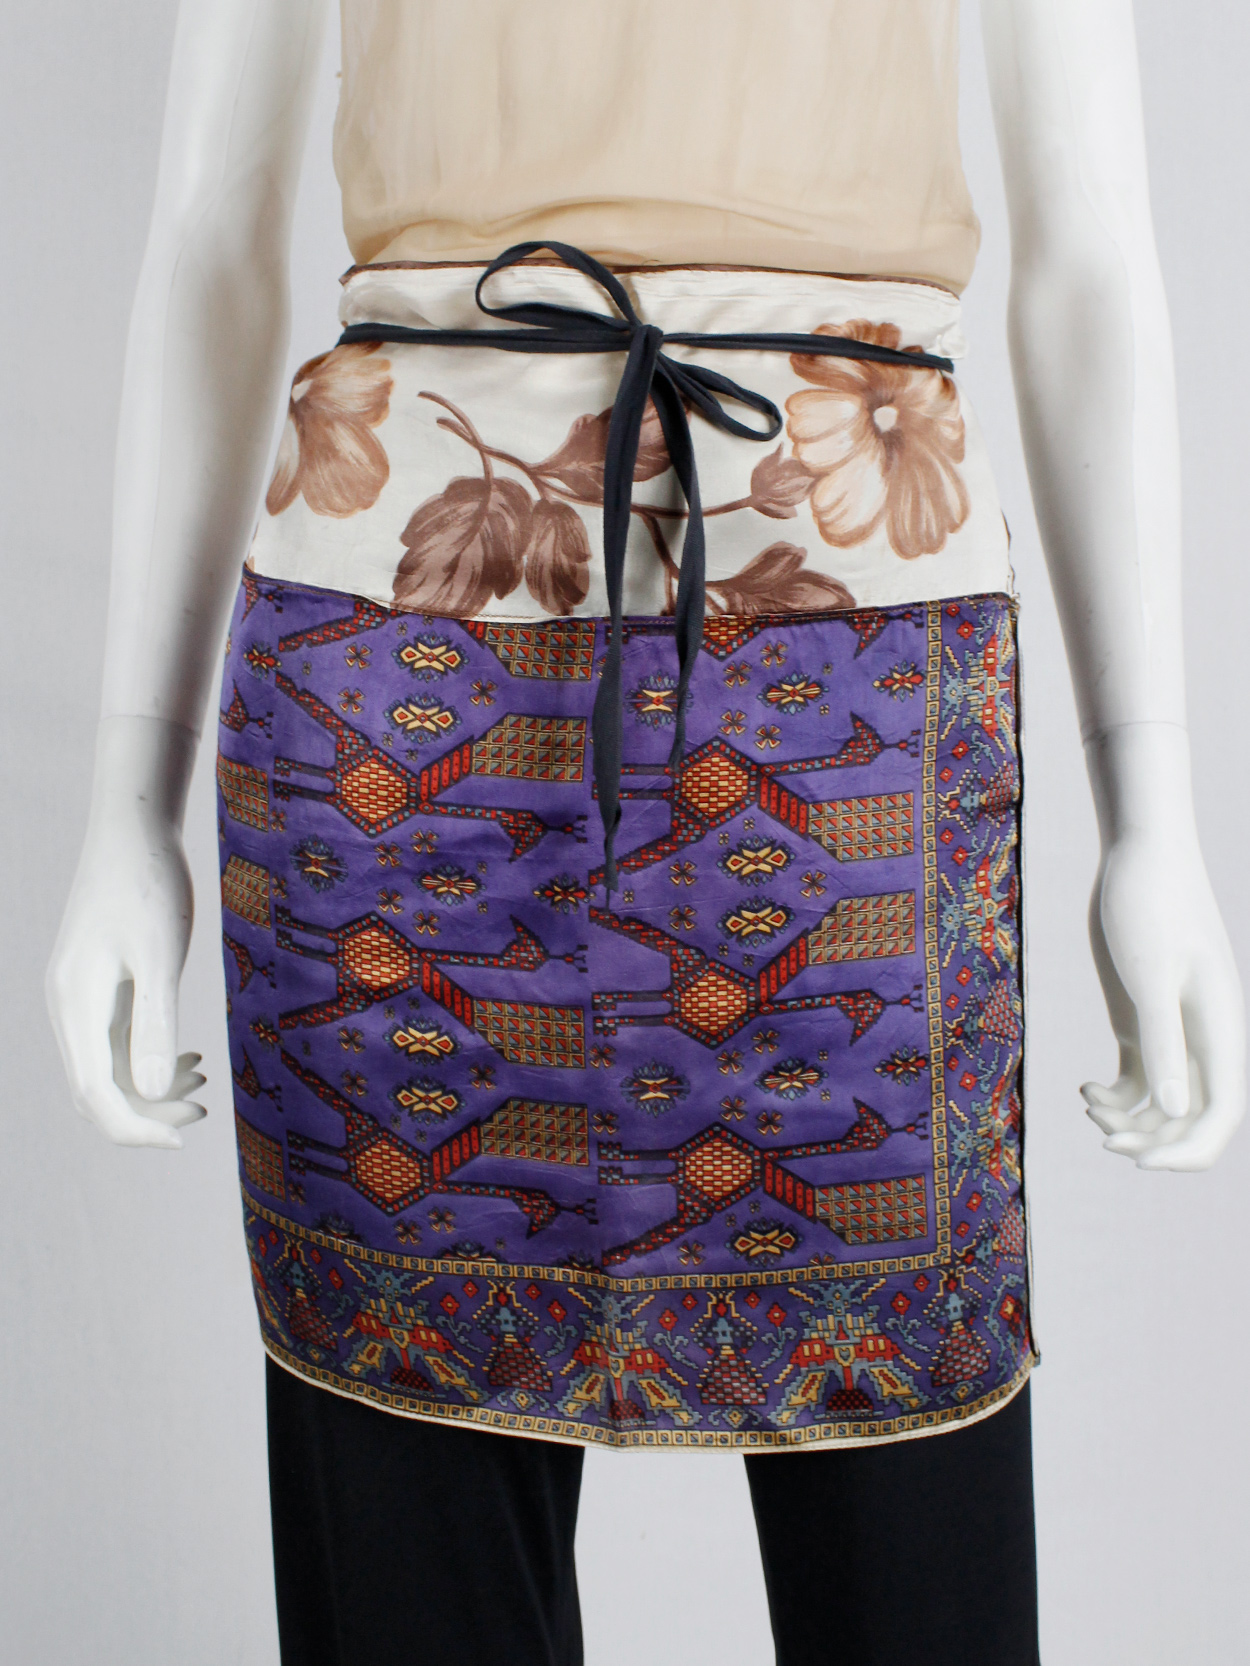 archive Maison Martin Margiela wrap skirt made of multiple scarfs sewn together spring 1992 (1)